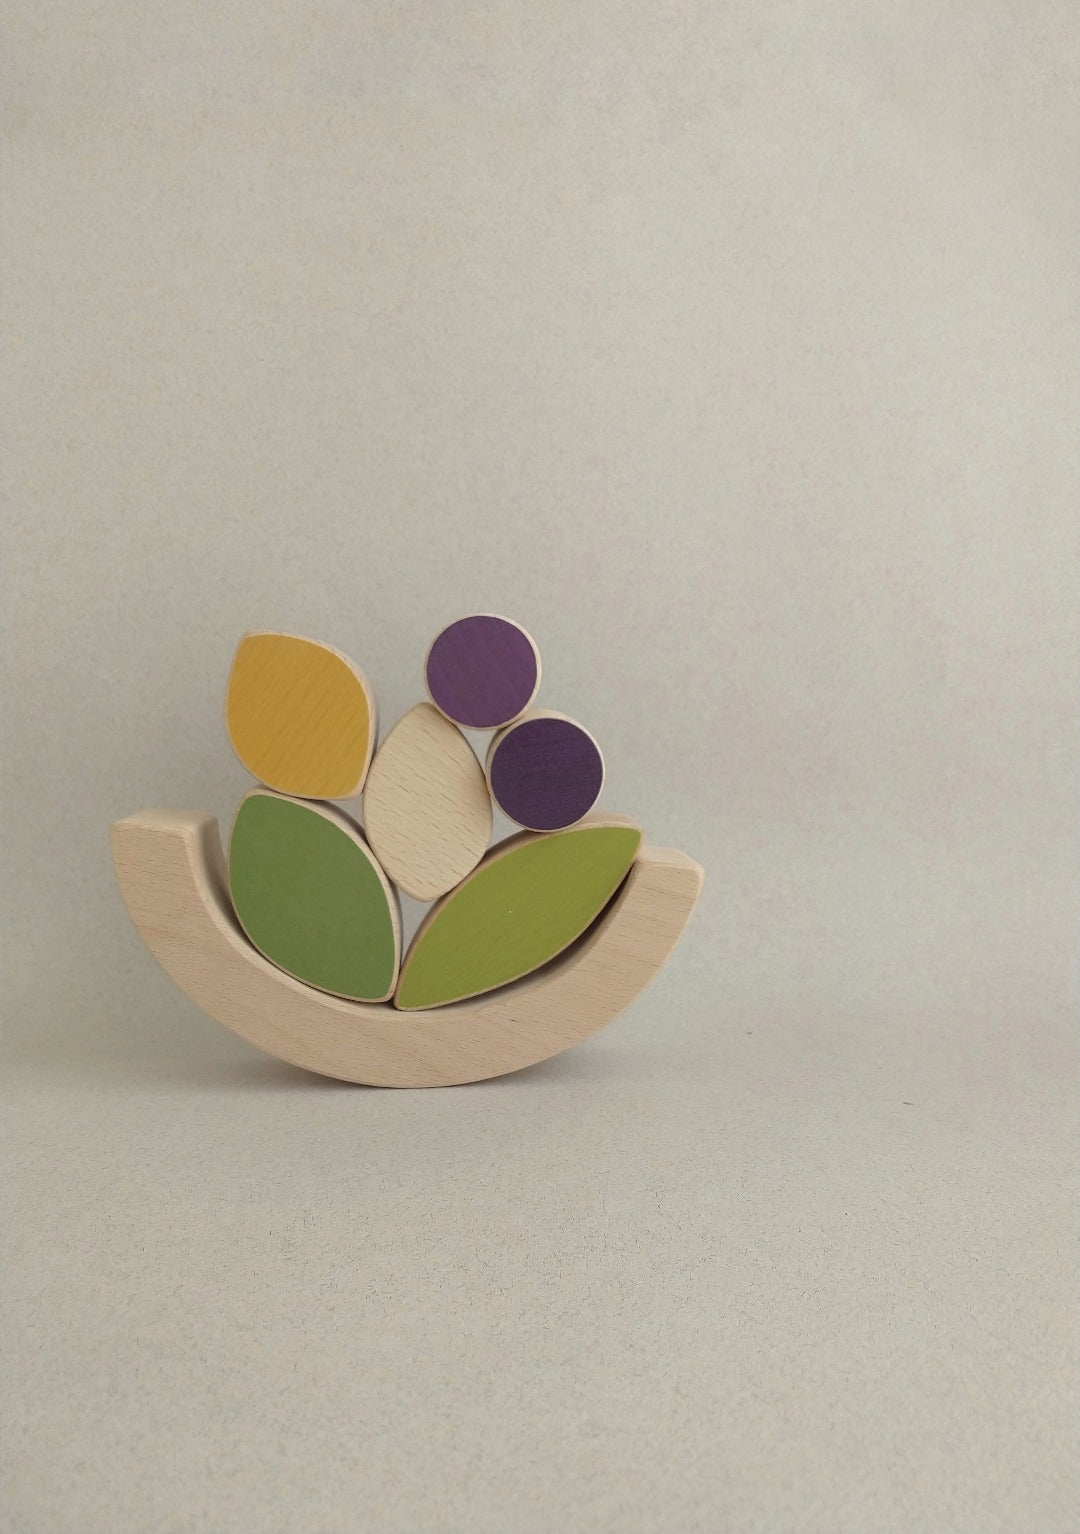 The leaves and blueberries stacking and balance toy is an open-ended, fun wooden toy for the little ones to play with.